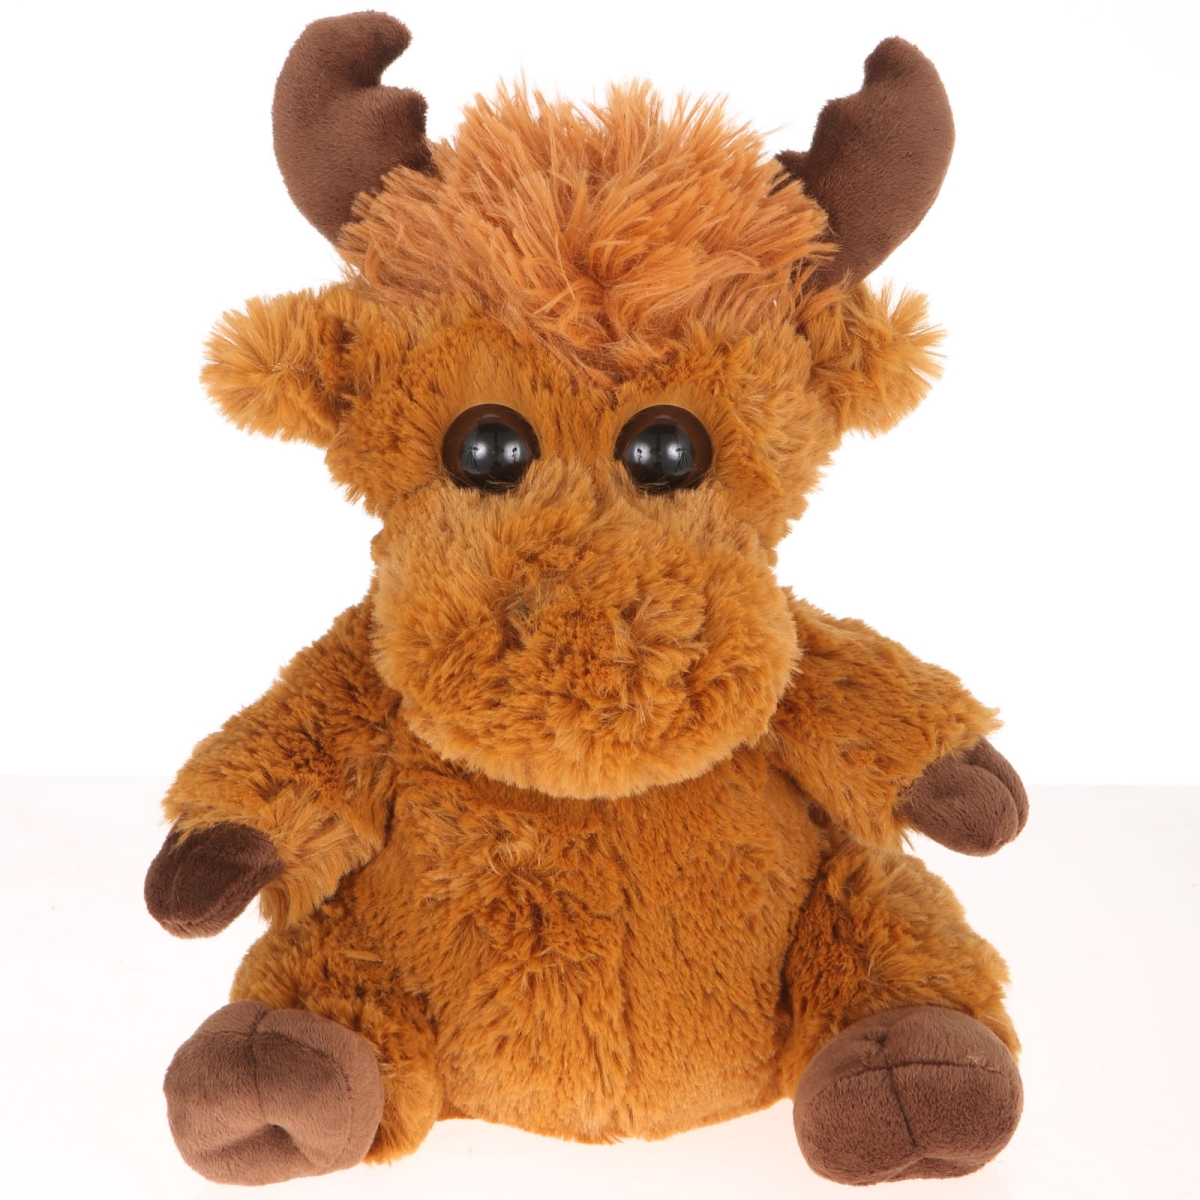 A00033 10.5 In. Plush Mop Tops Moose